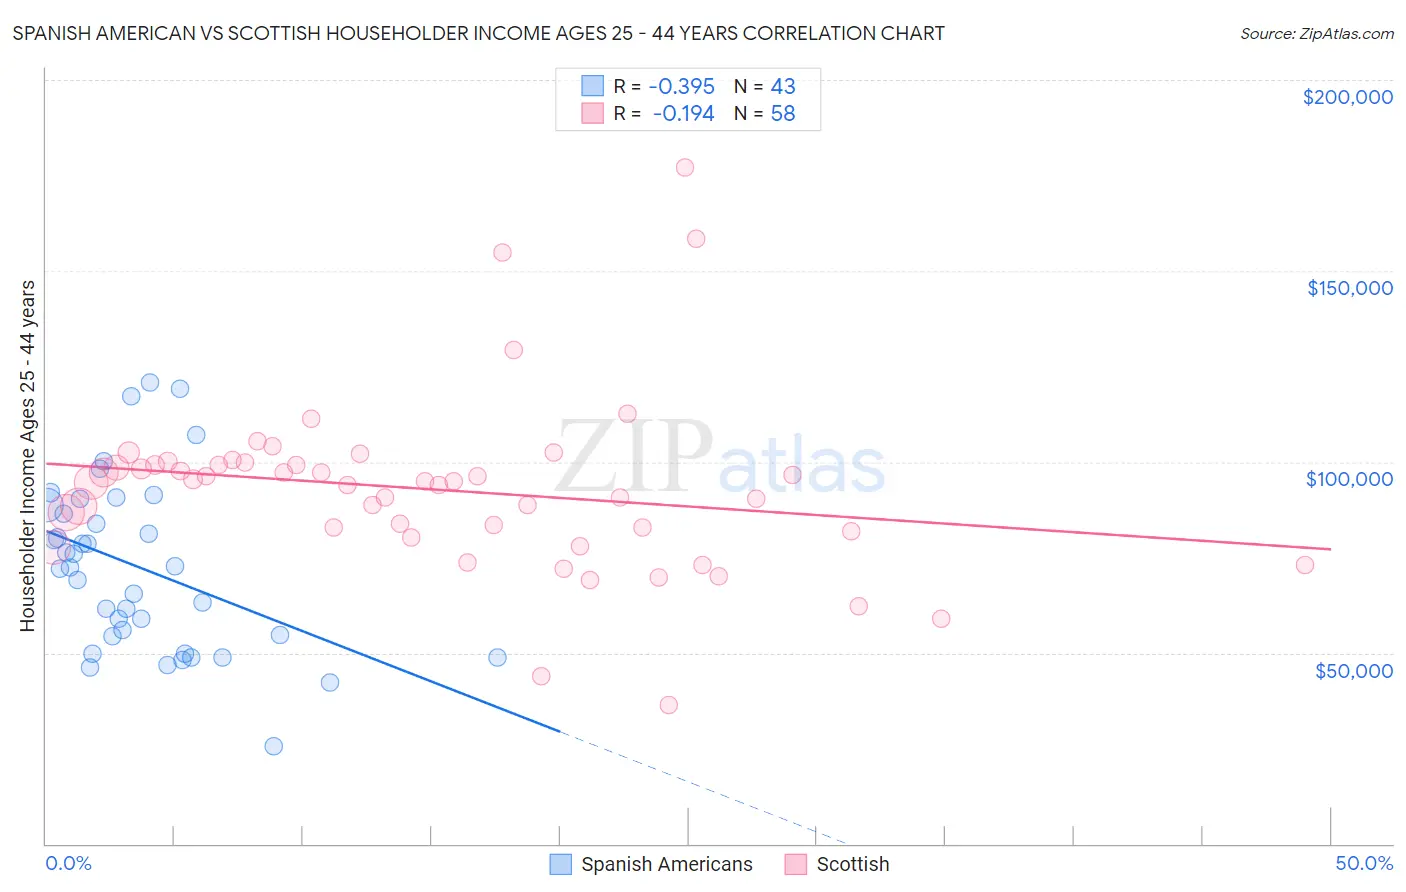 Spanish American vs Scottish Householder Income Ages 25 - 44 years